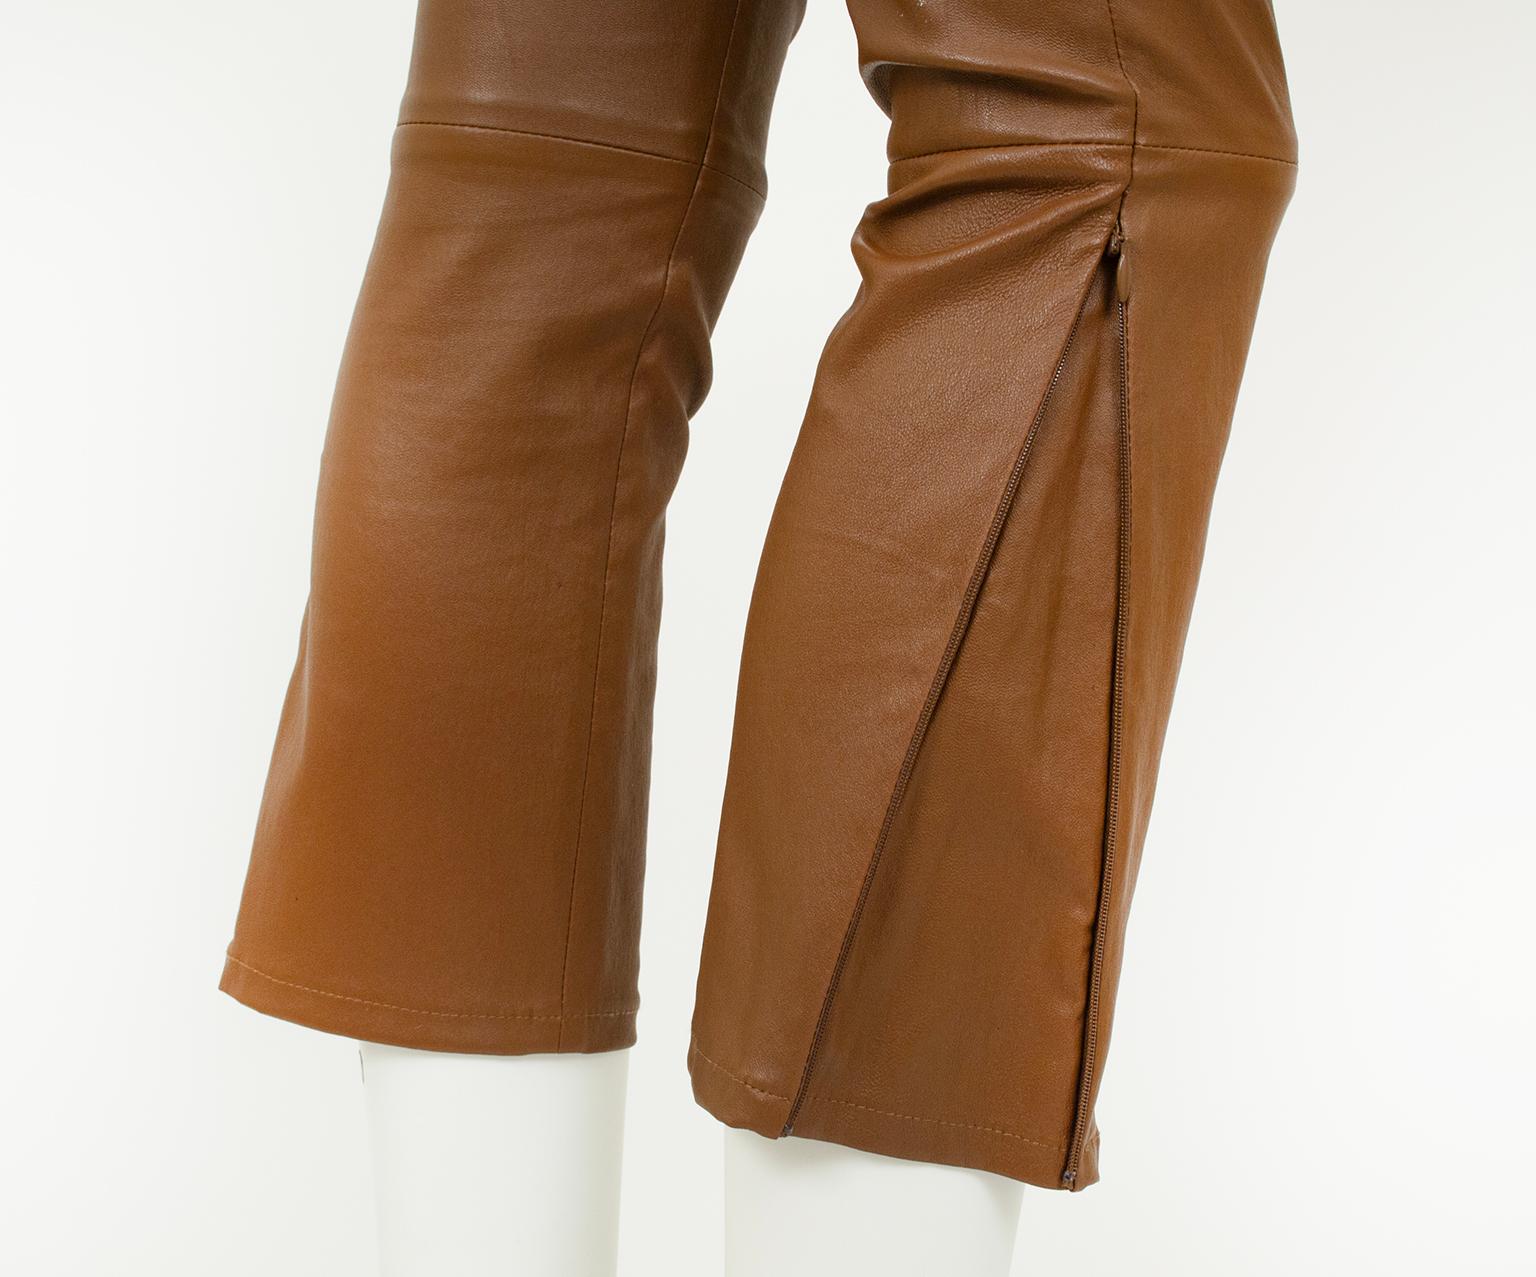 New The Row Ellerton Brown Leather Ankle Zip Stretch Moto Leggings – XS-S, 2011 For Sale 6